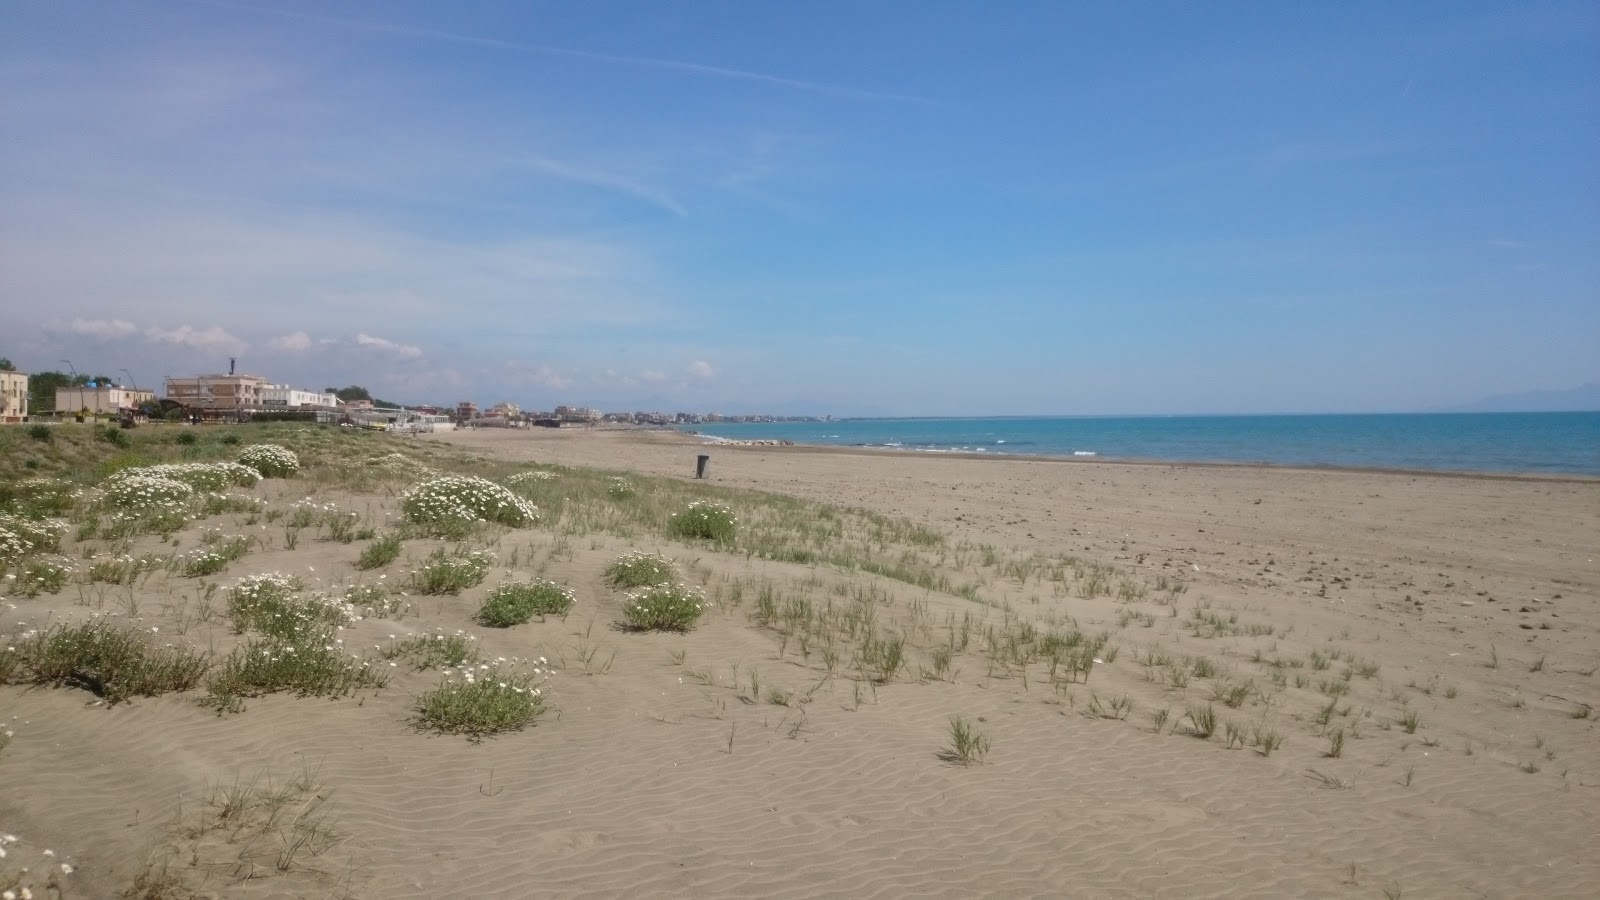 Photo of Spiaggia Attrezzata - popular place among relax connoisseurs